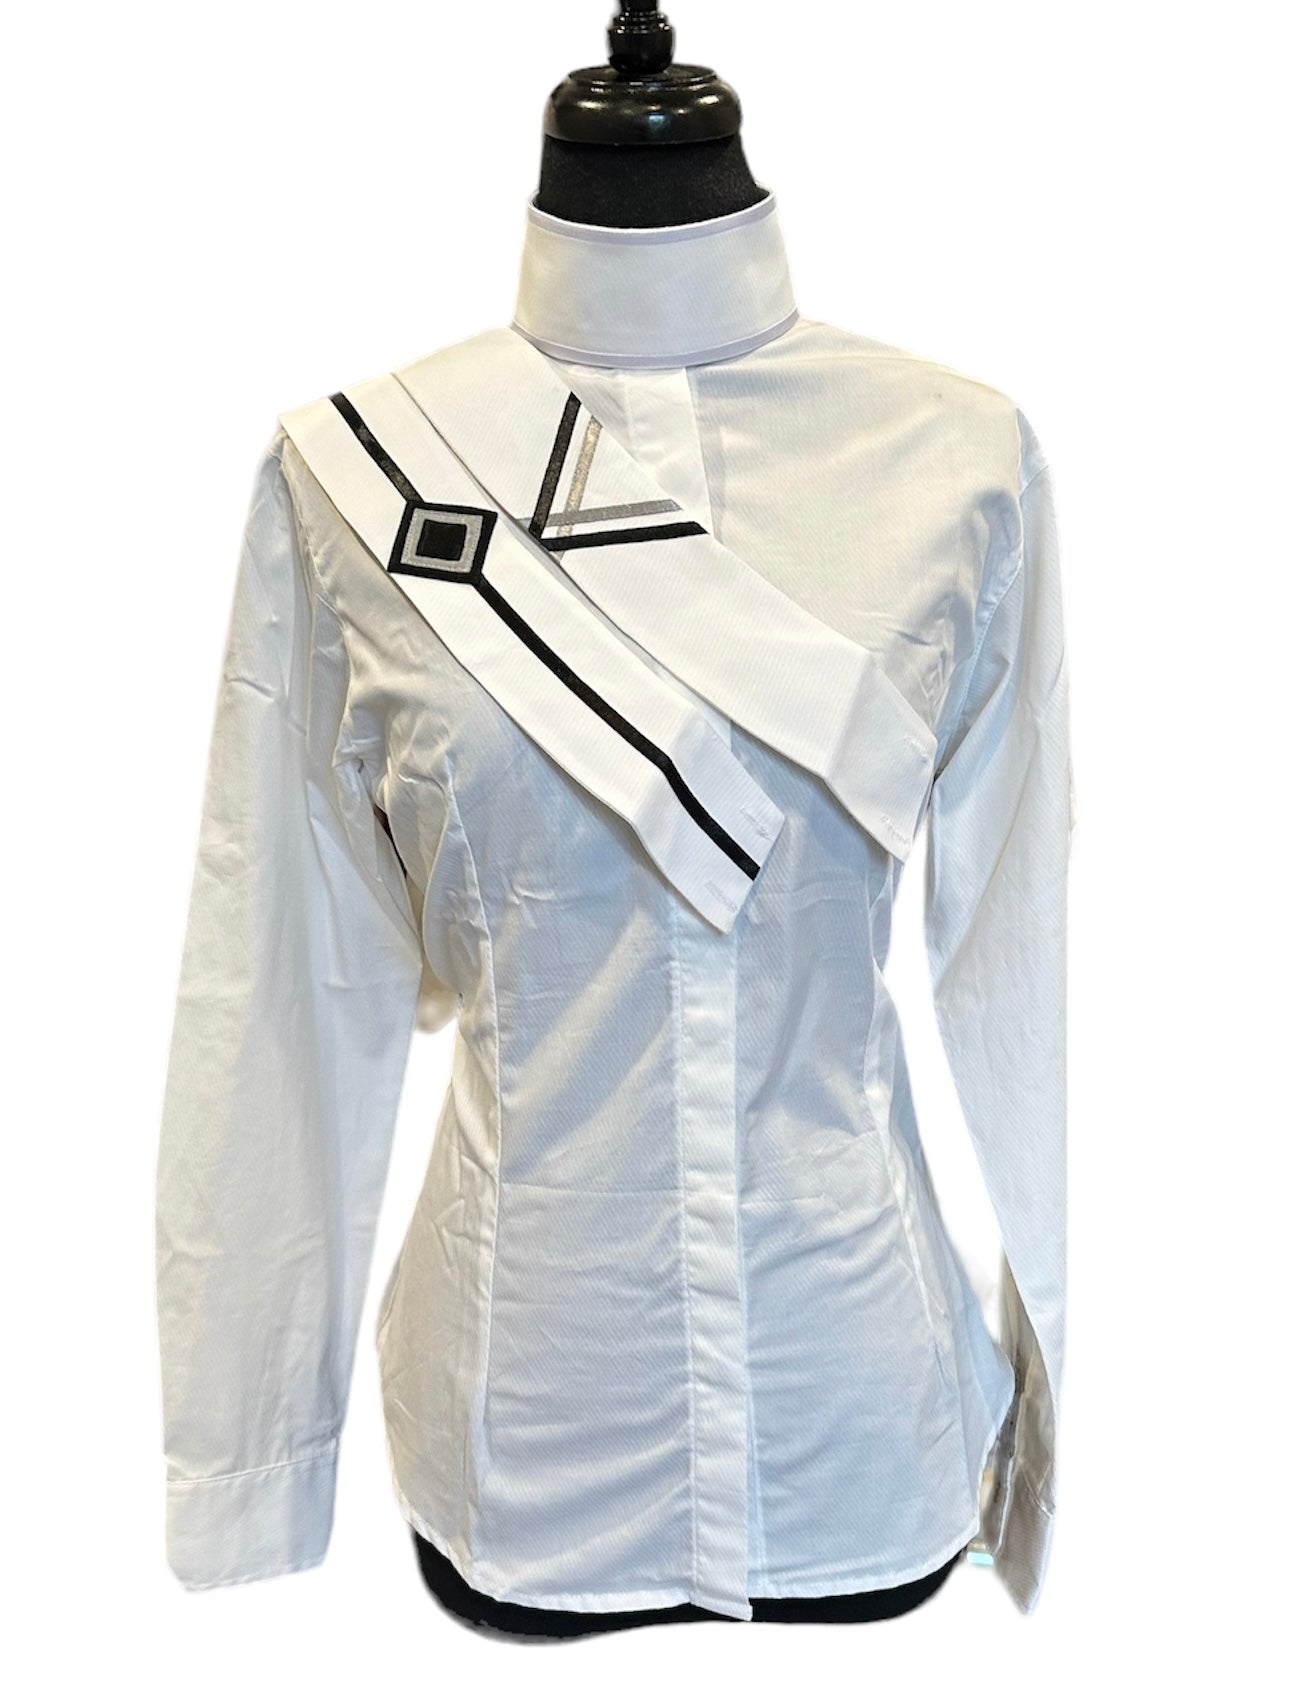 English Show Shirt White with Black and Silver Fabric Code V04